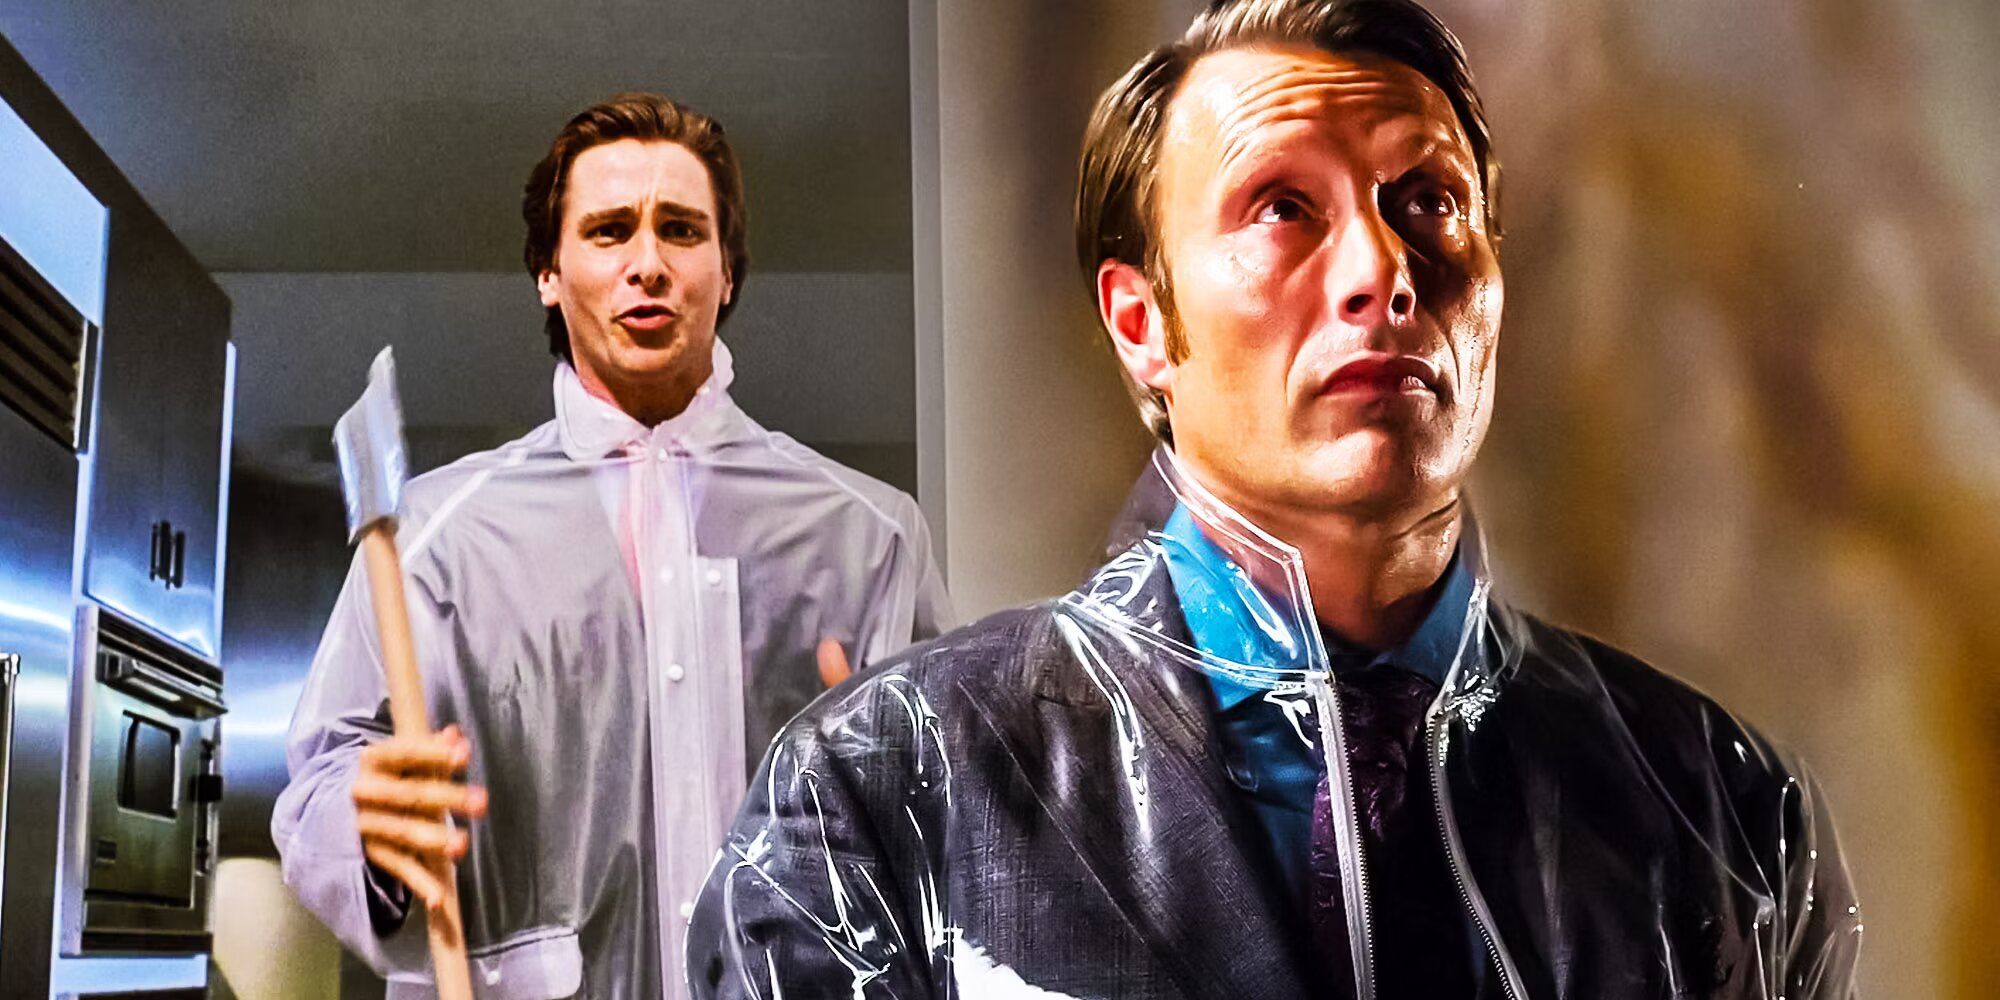 Hannibal Lecter and Patrick Bateman in their plastic suits